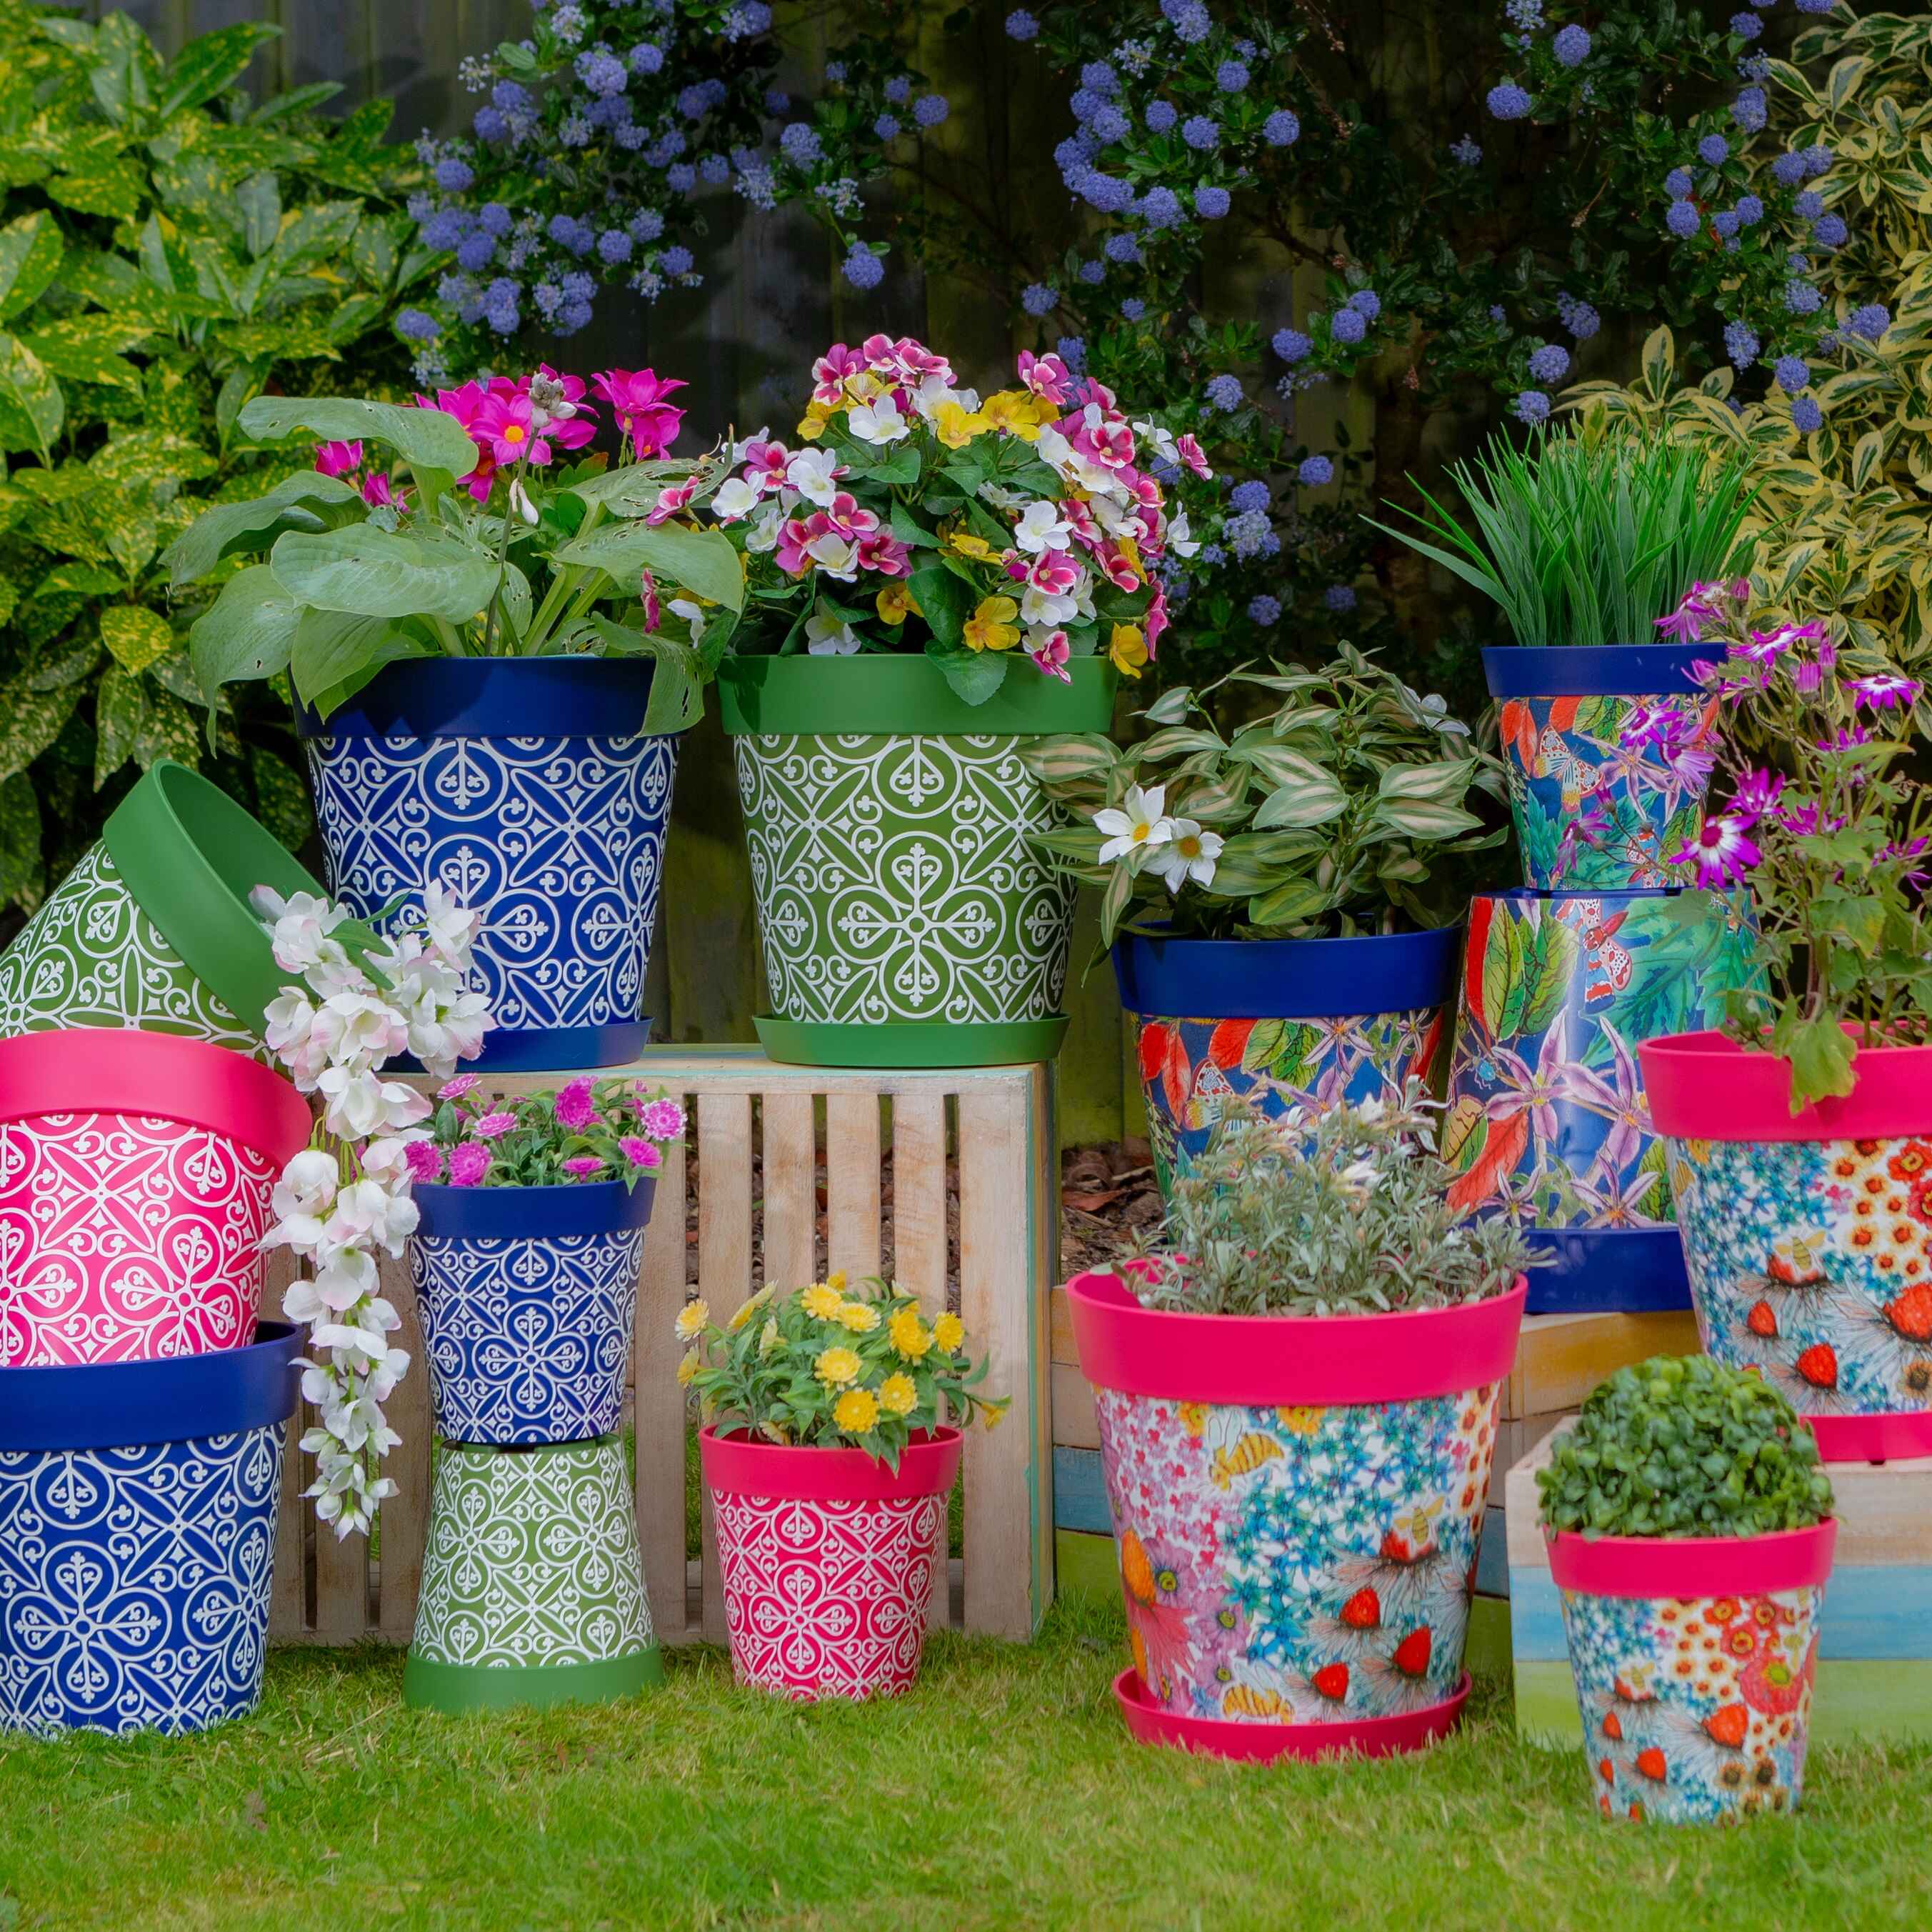 A variety of colourful flowerpots made of plastic, in a garden setting